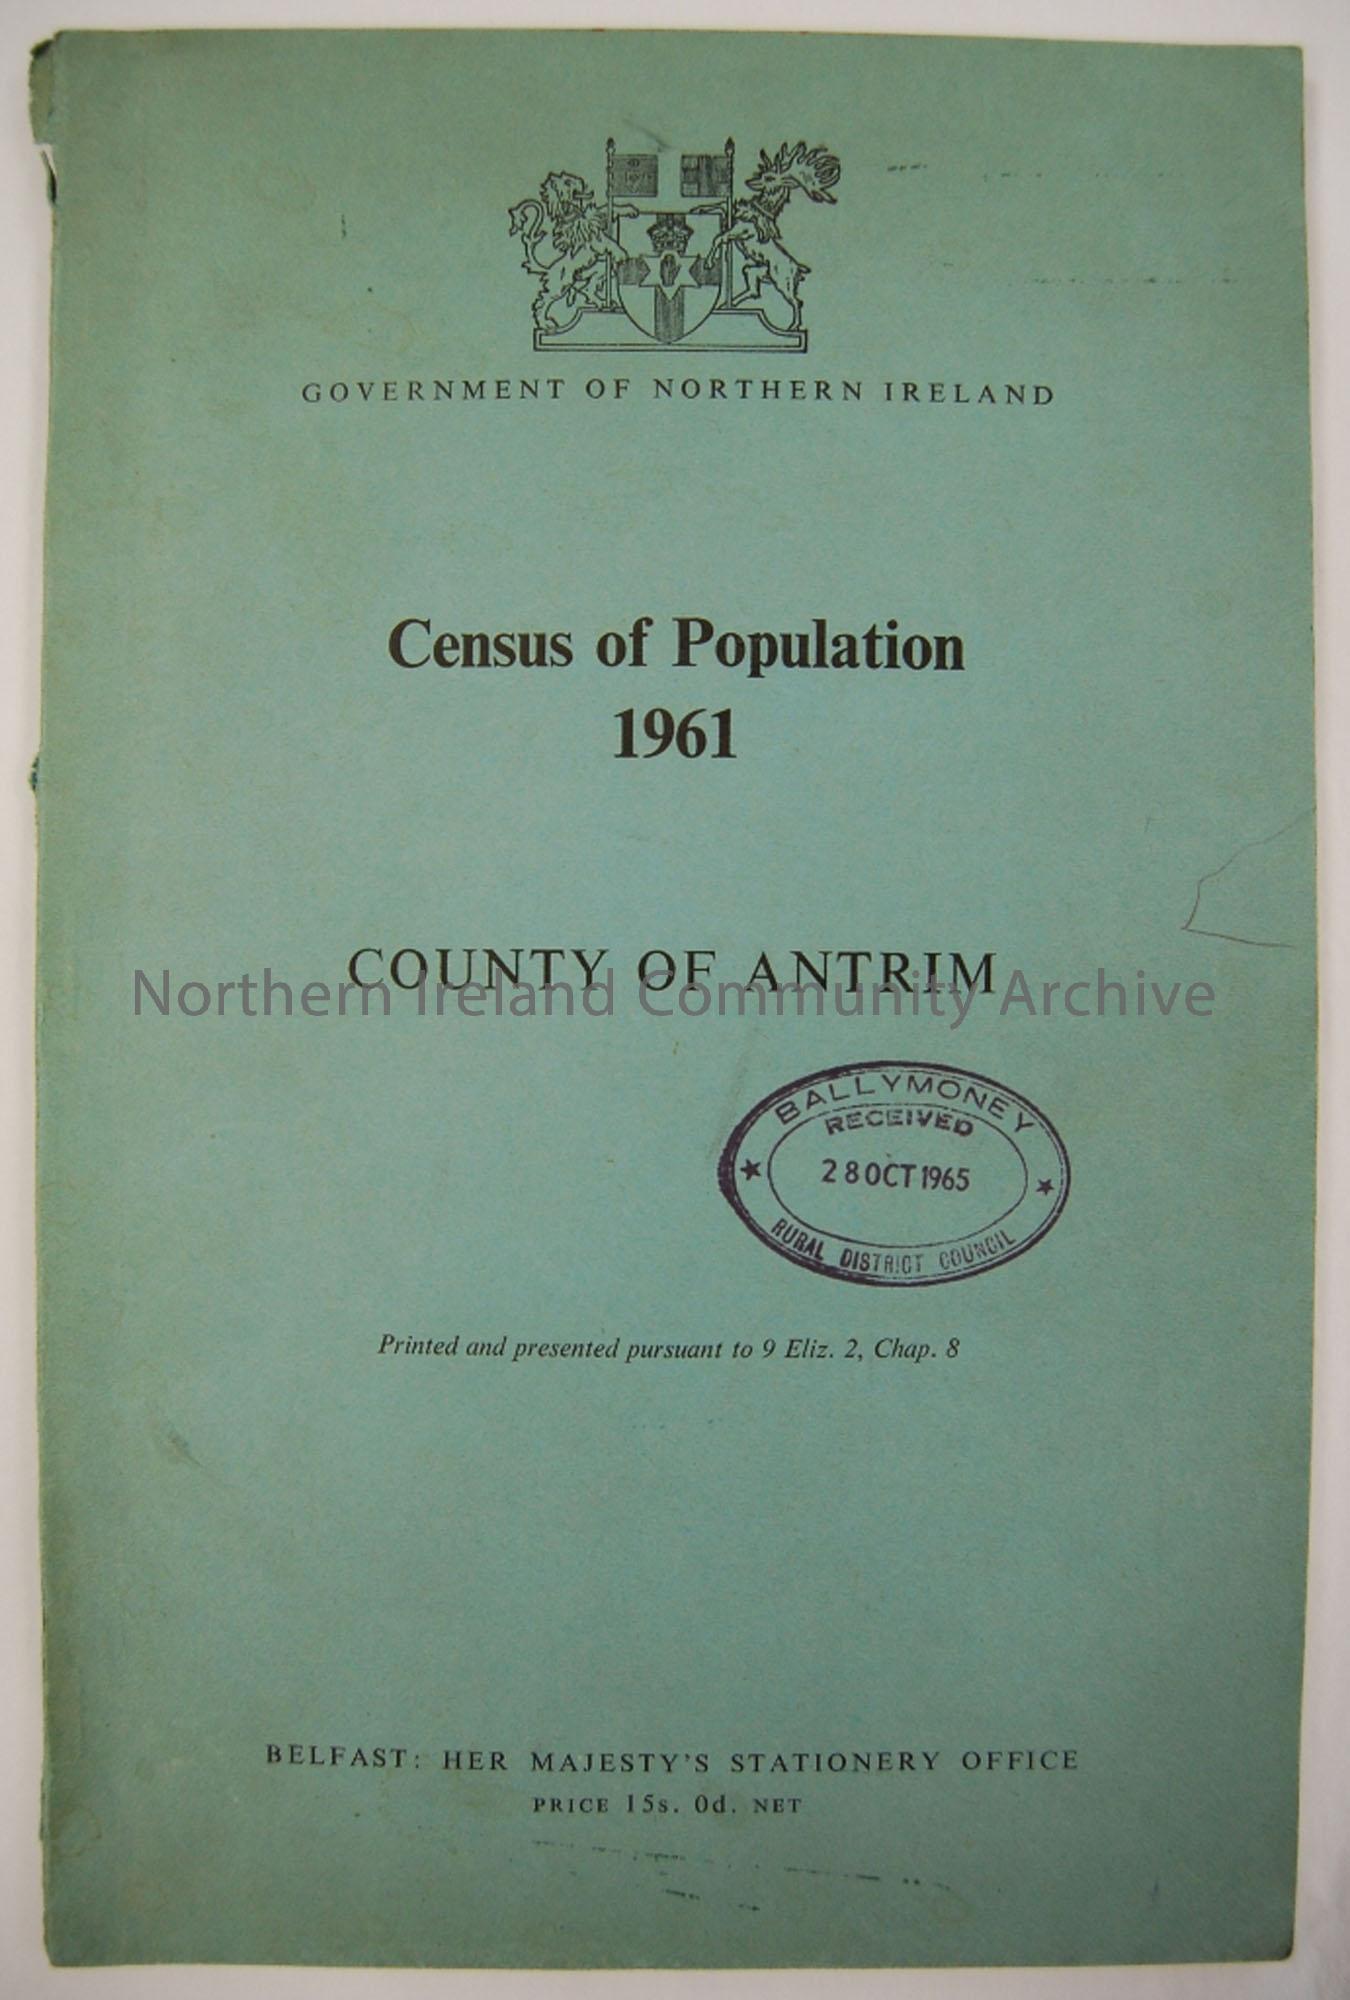 Government of Northern Ireland Census of Population. 1961. County Antrim.